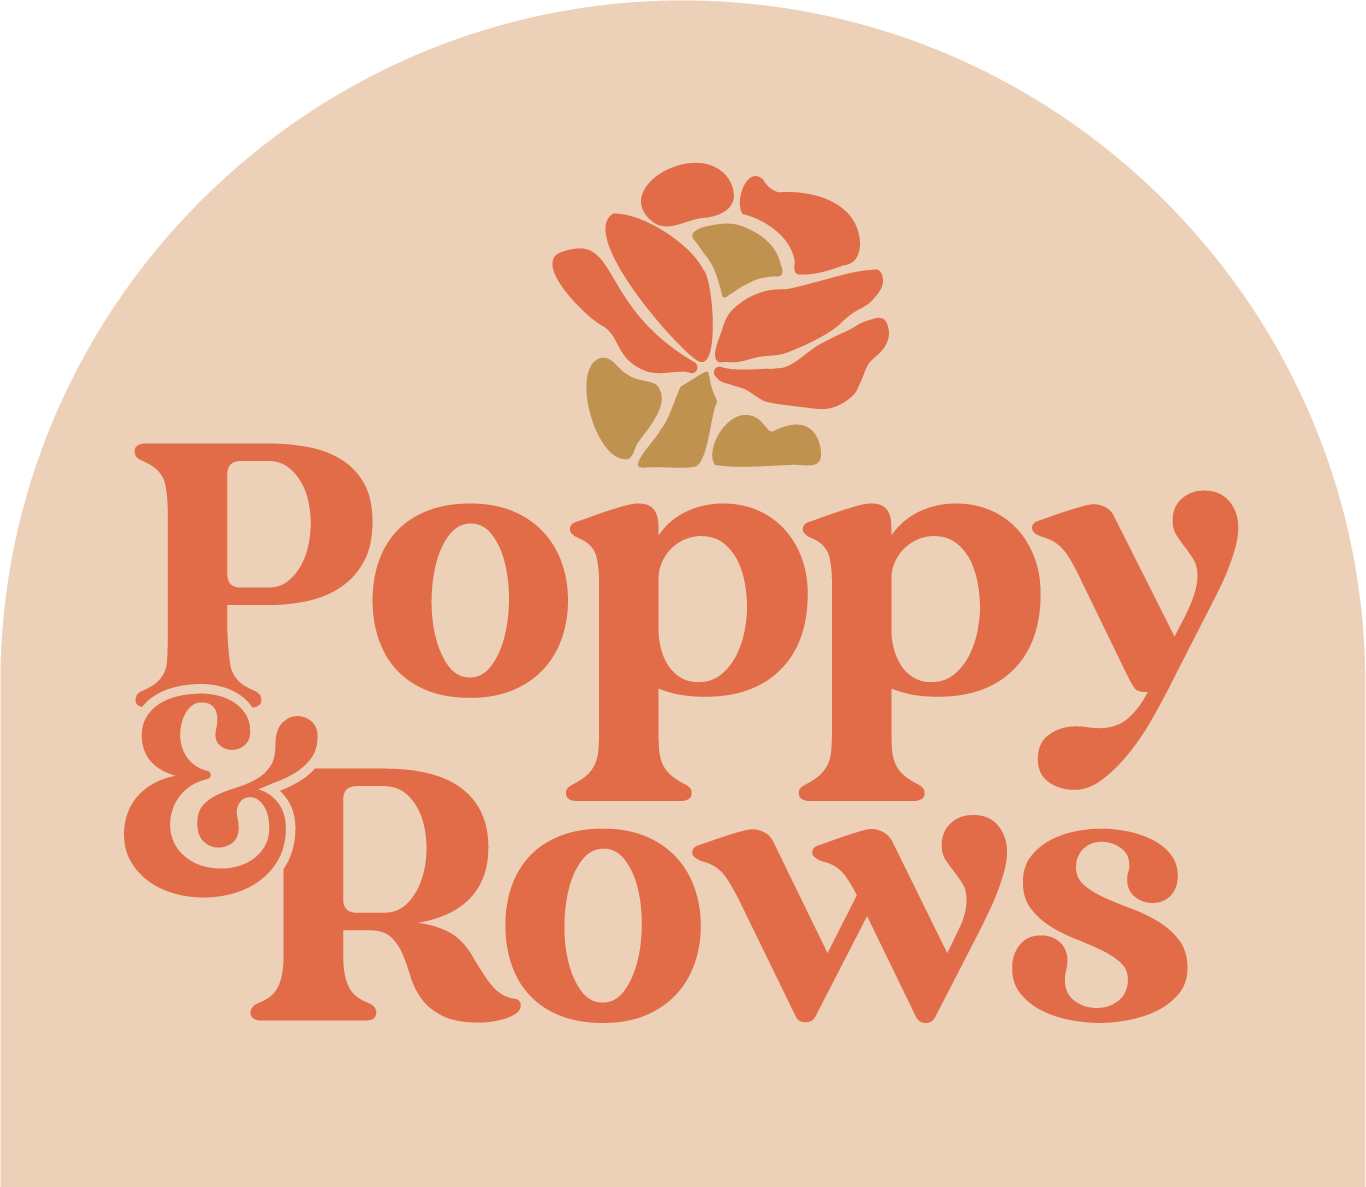 Poppy and Rows